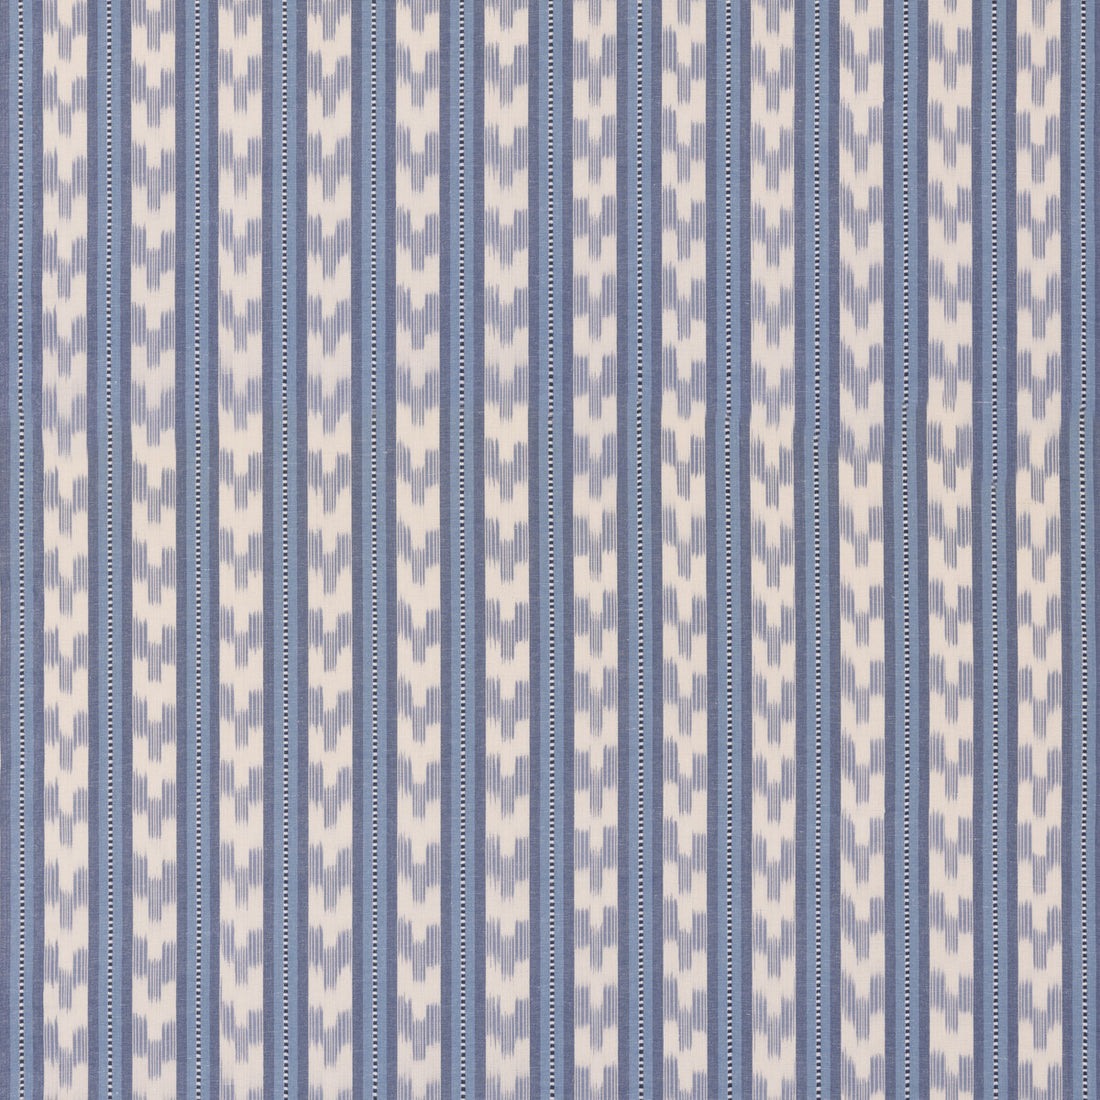 Chart Stripe fabric in blue color - pattern FD824.H101.0 - by Mulberry in the Westerly Stripes collection